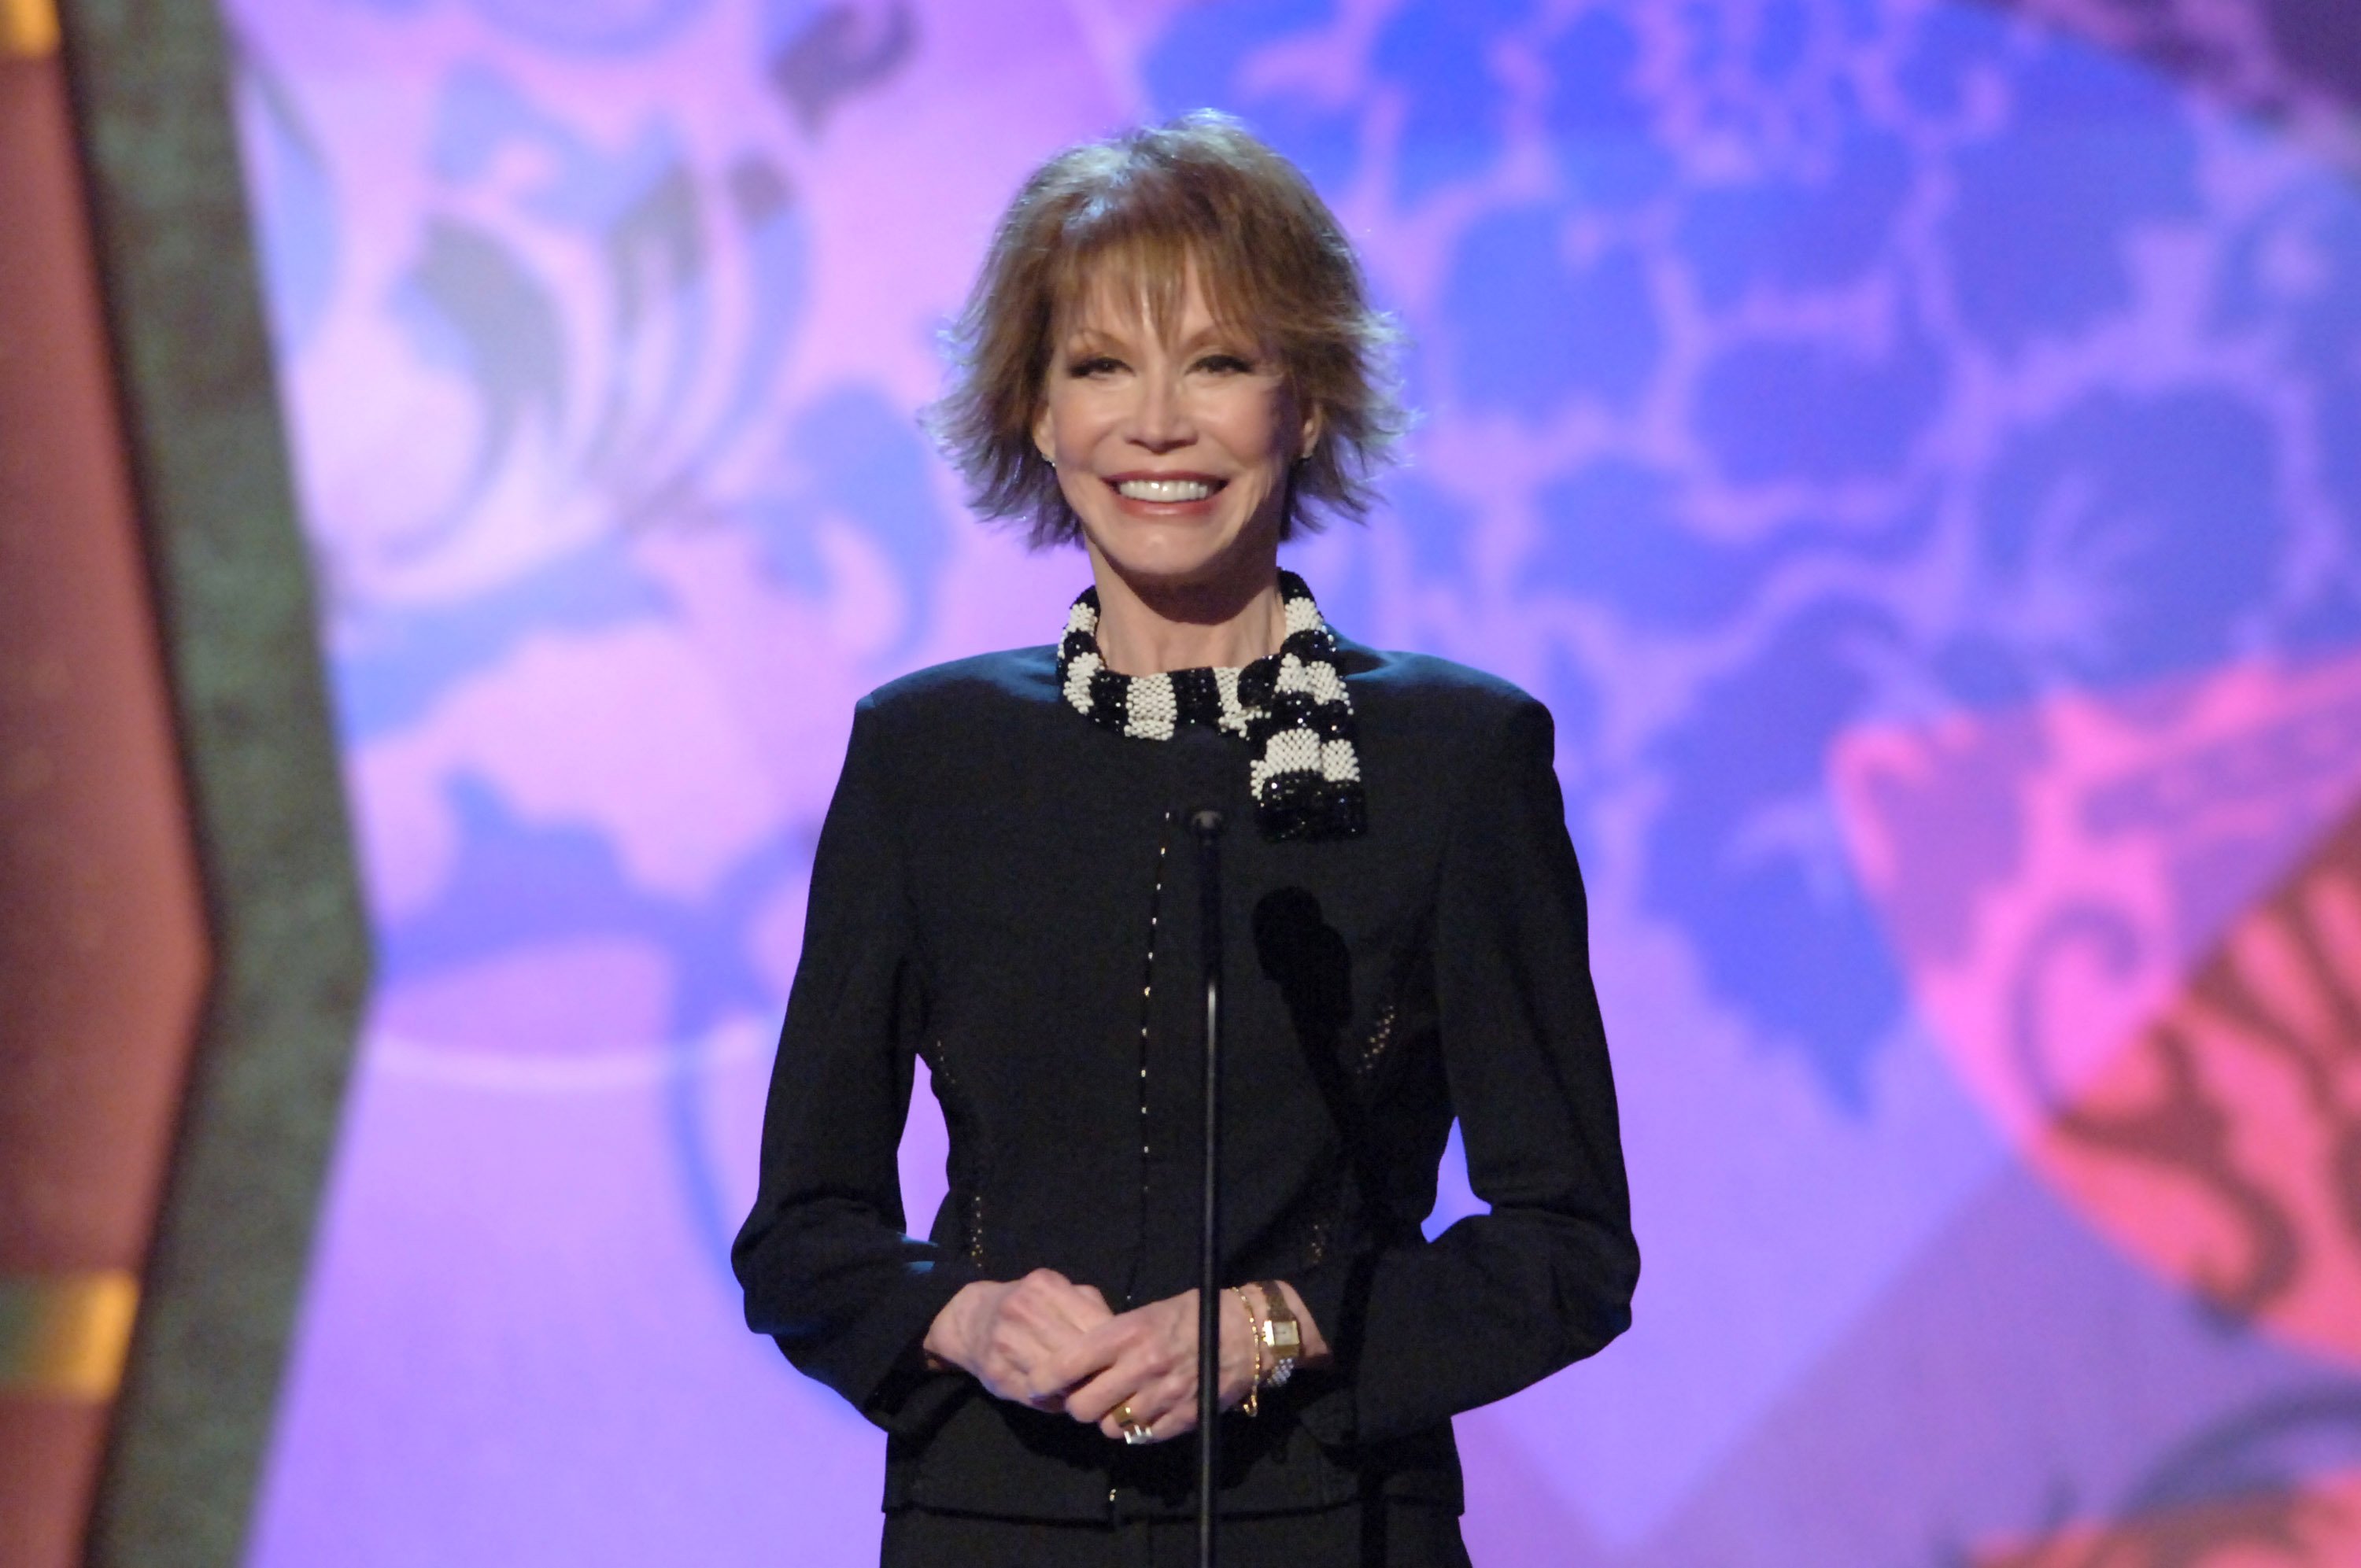 Mary Tyler Moore, presenter during 4th Annual TV Land Awards - Show at Barker Hangar in Santa Monica, California, United States | Photo: Getty Images